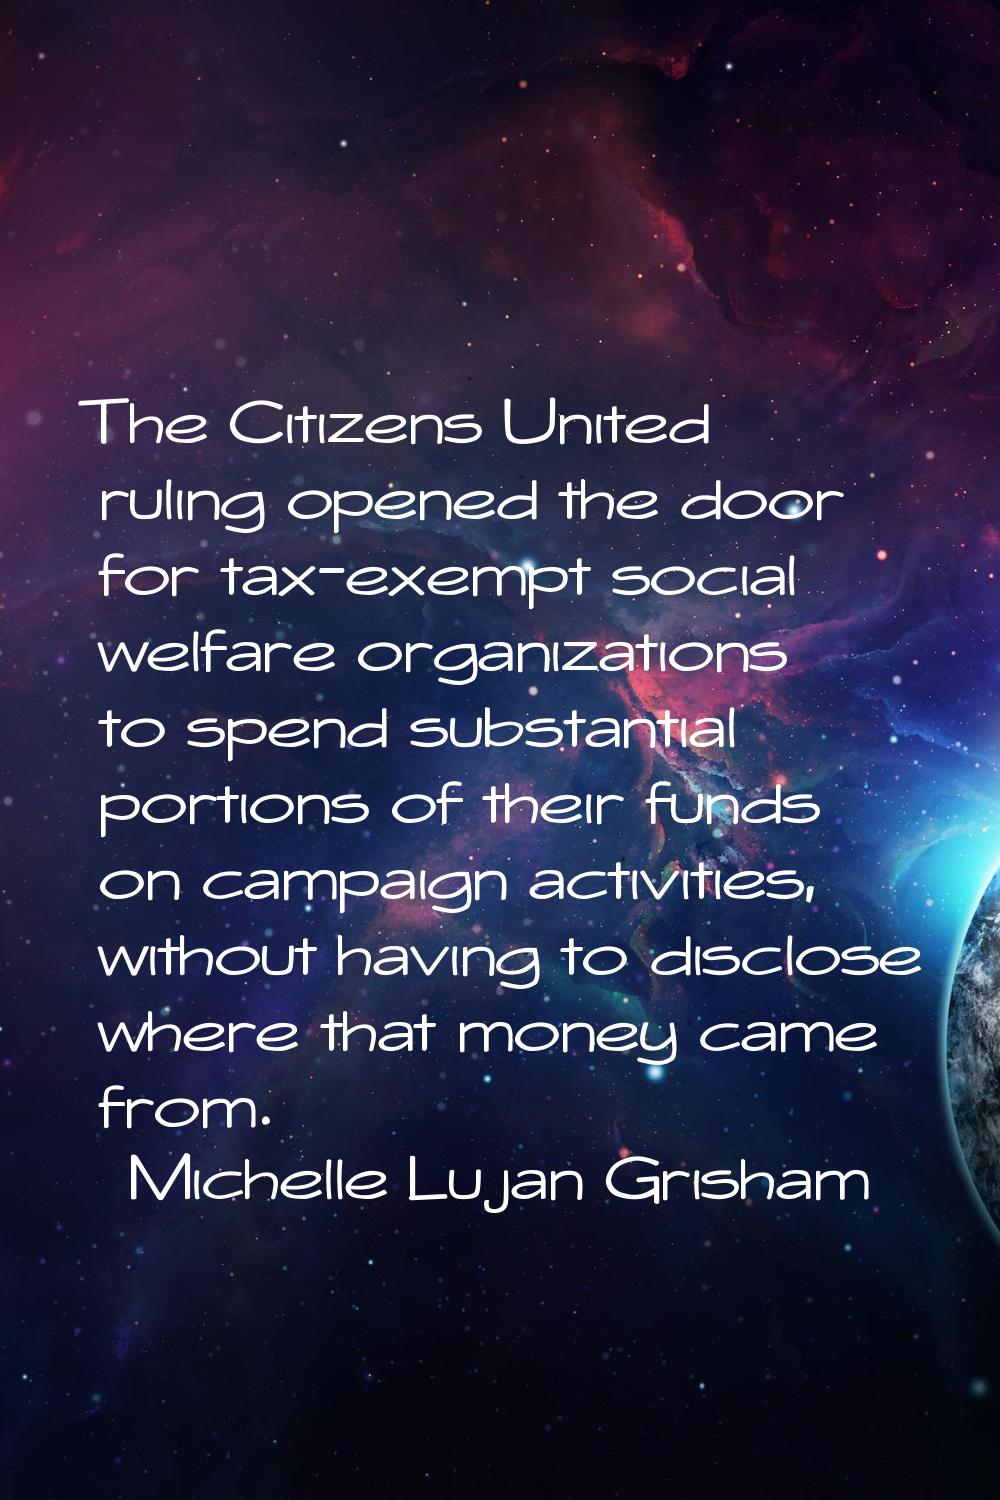 The Citizens United ruling opened the door for tax-exempt social welfare organizations to spend sub